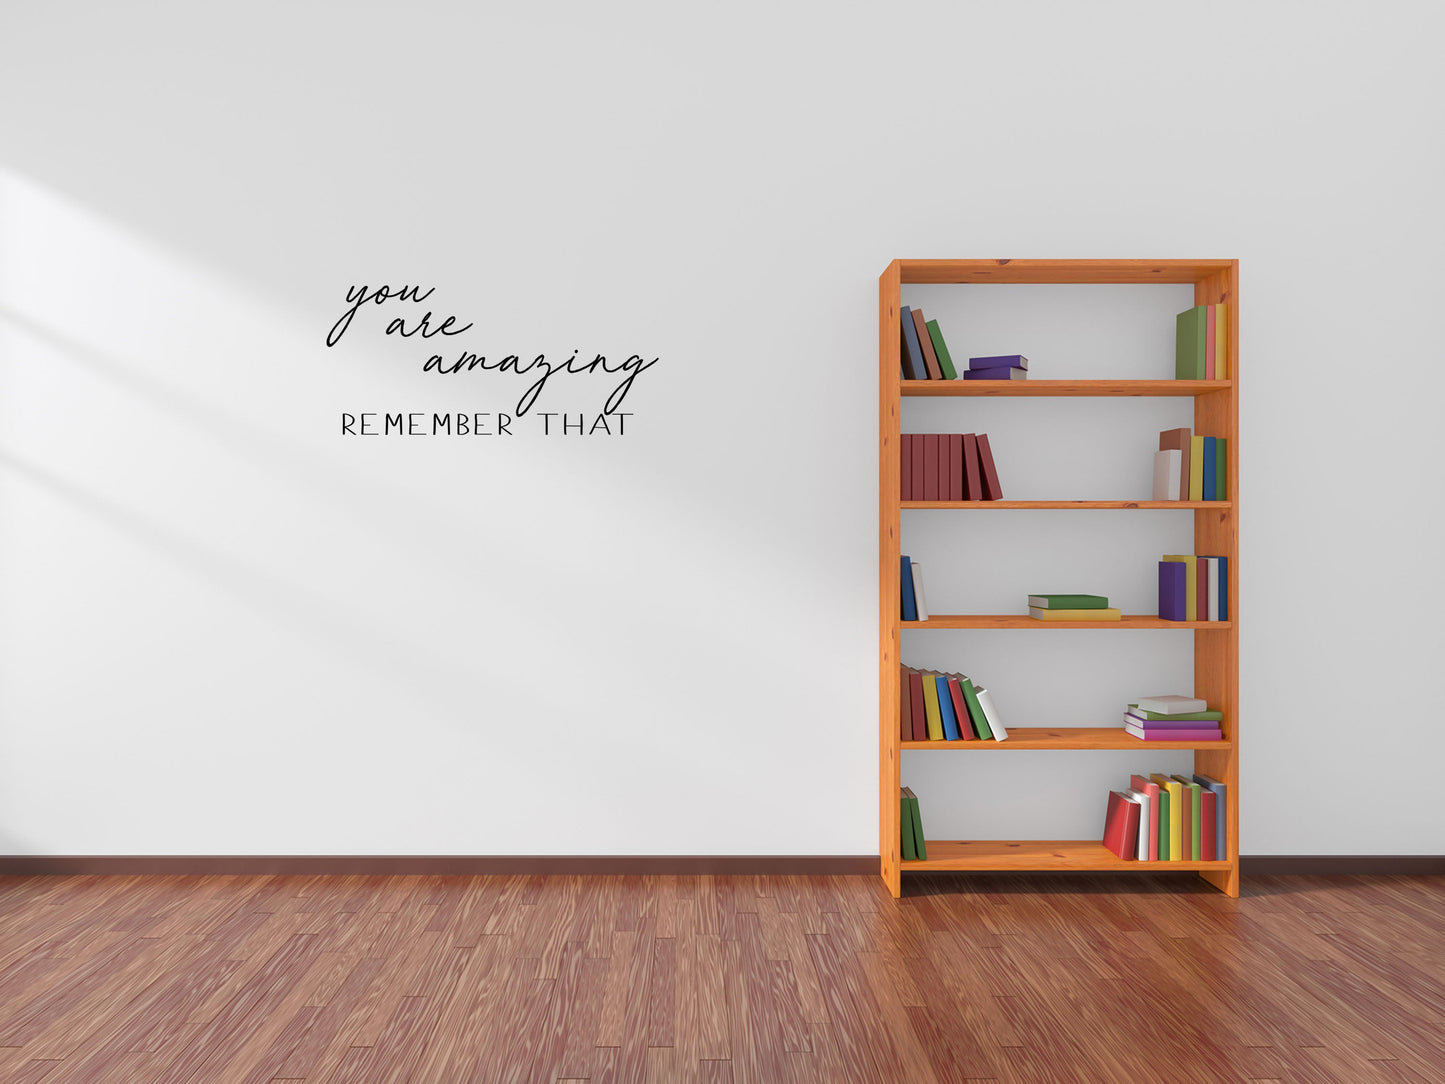 You Are Amazing Wall Decal Sticker For Office - Inspirational Wall Decals Home Decor Decals Inspirational Wall Signs 